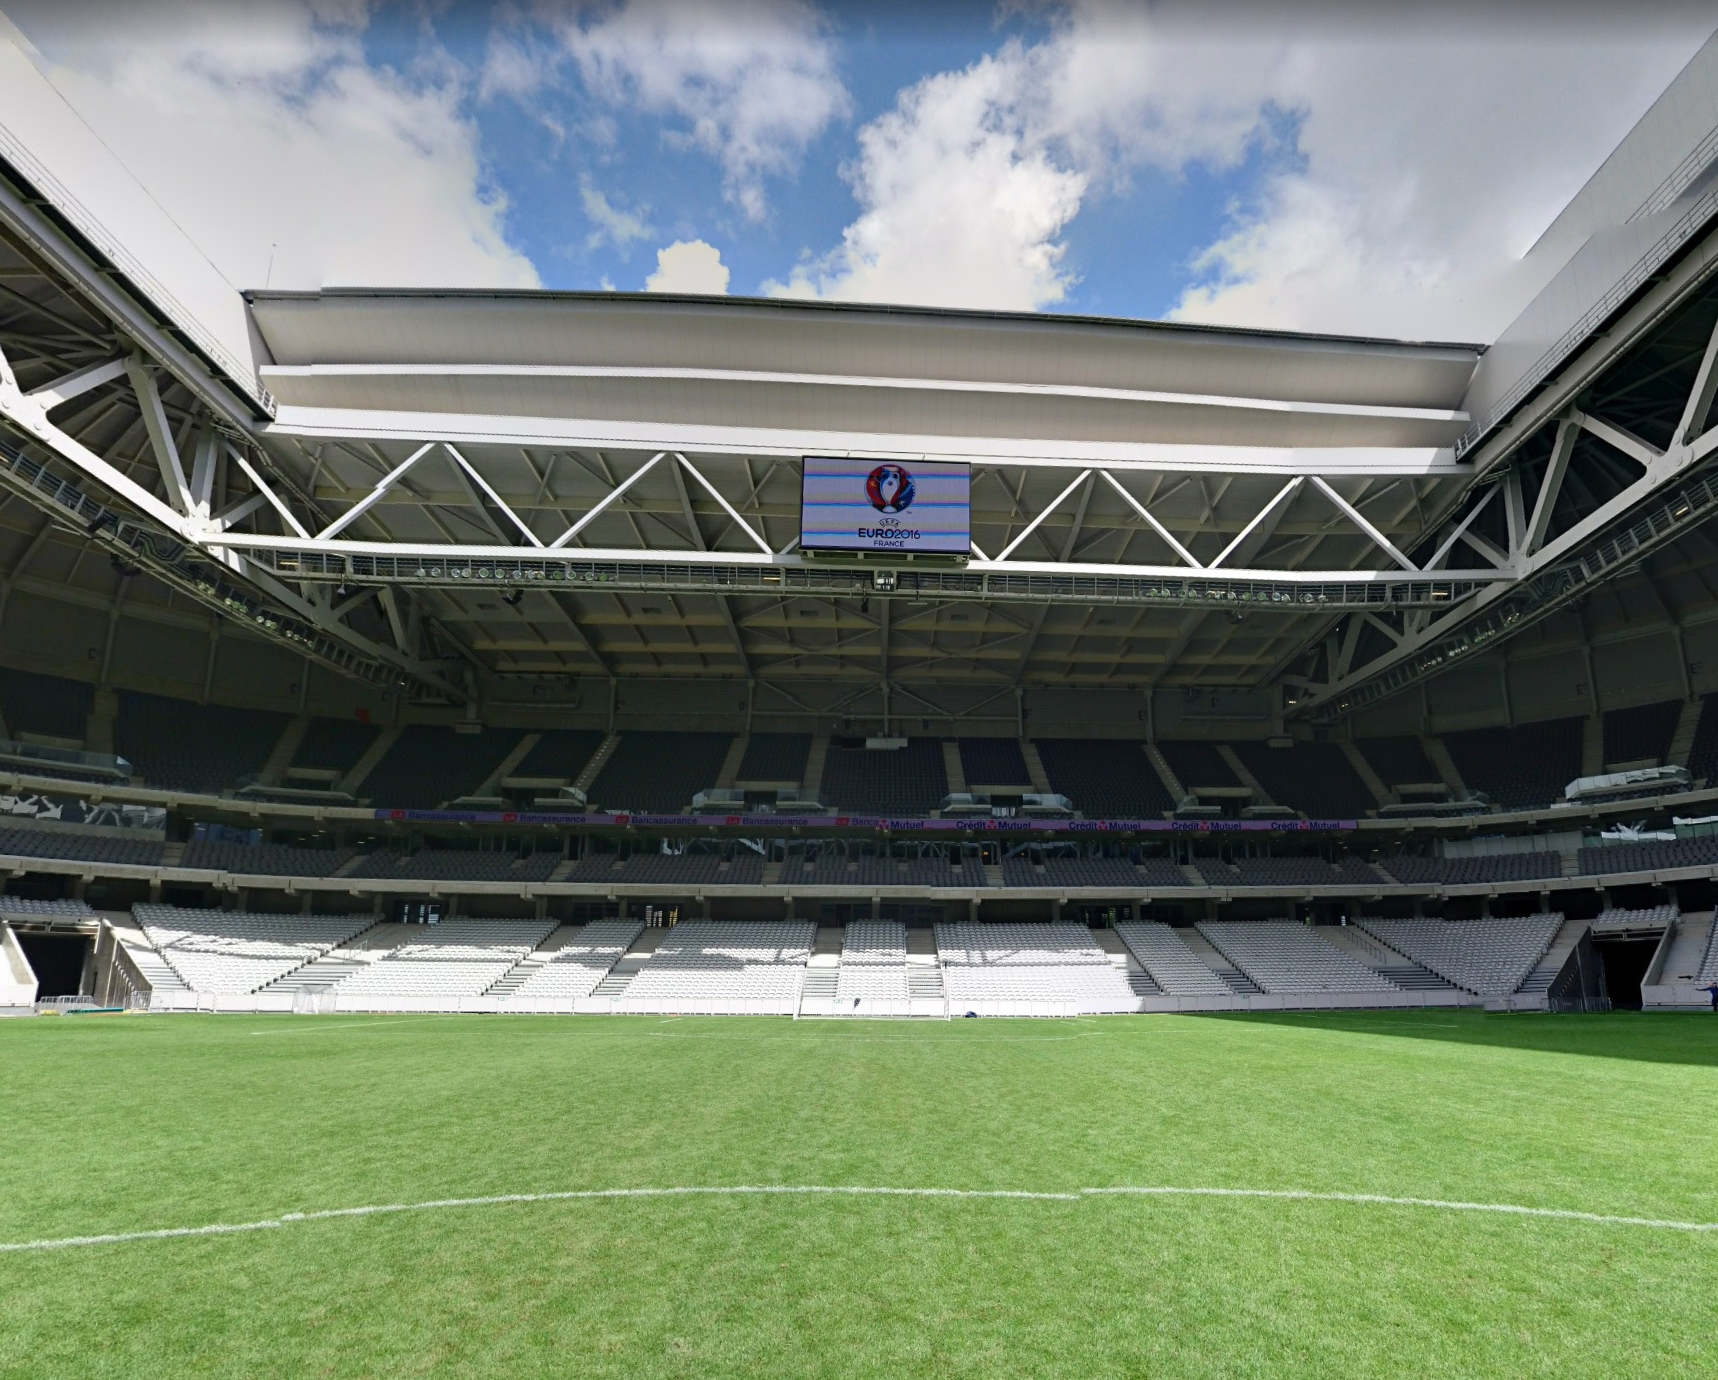 Decathlon Arena - Stade Pierre Mauroy by Google Earth